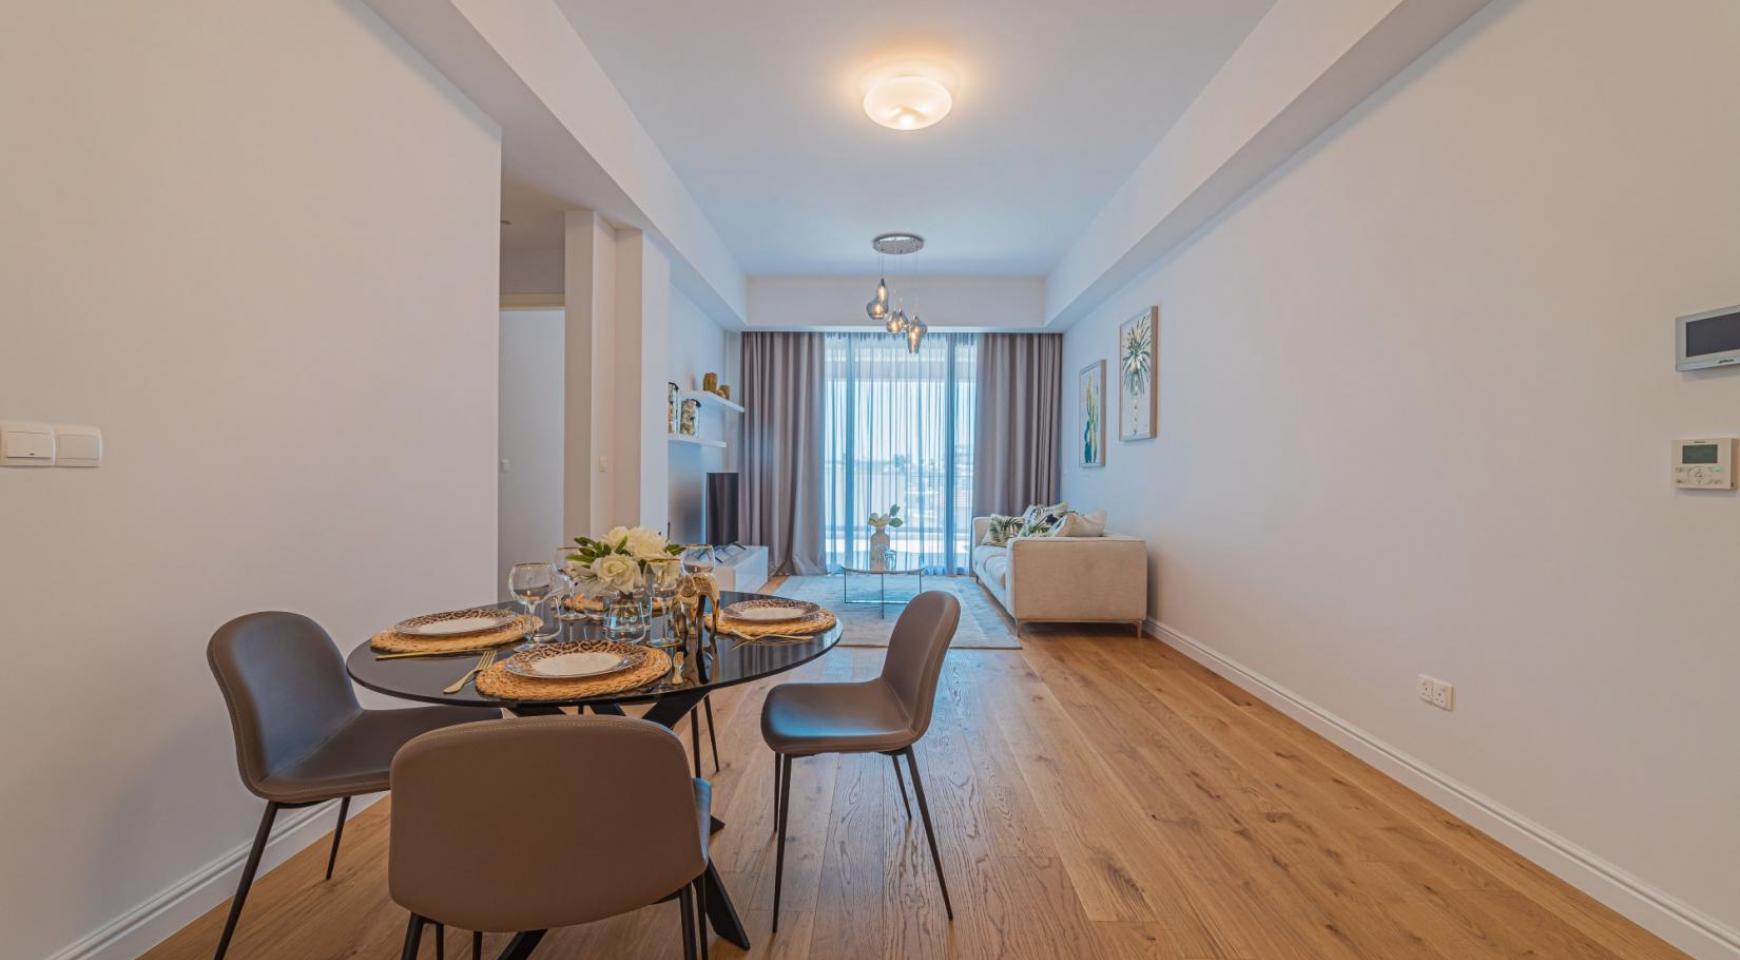 Hortensia Residence, Apt. 201. 2 Bedroom Apartment within a New Complex near the Sea  - 56